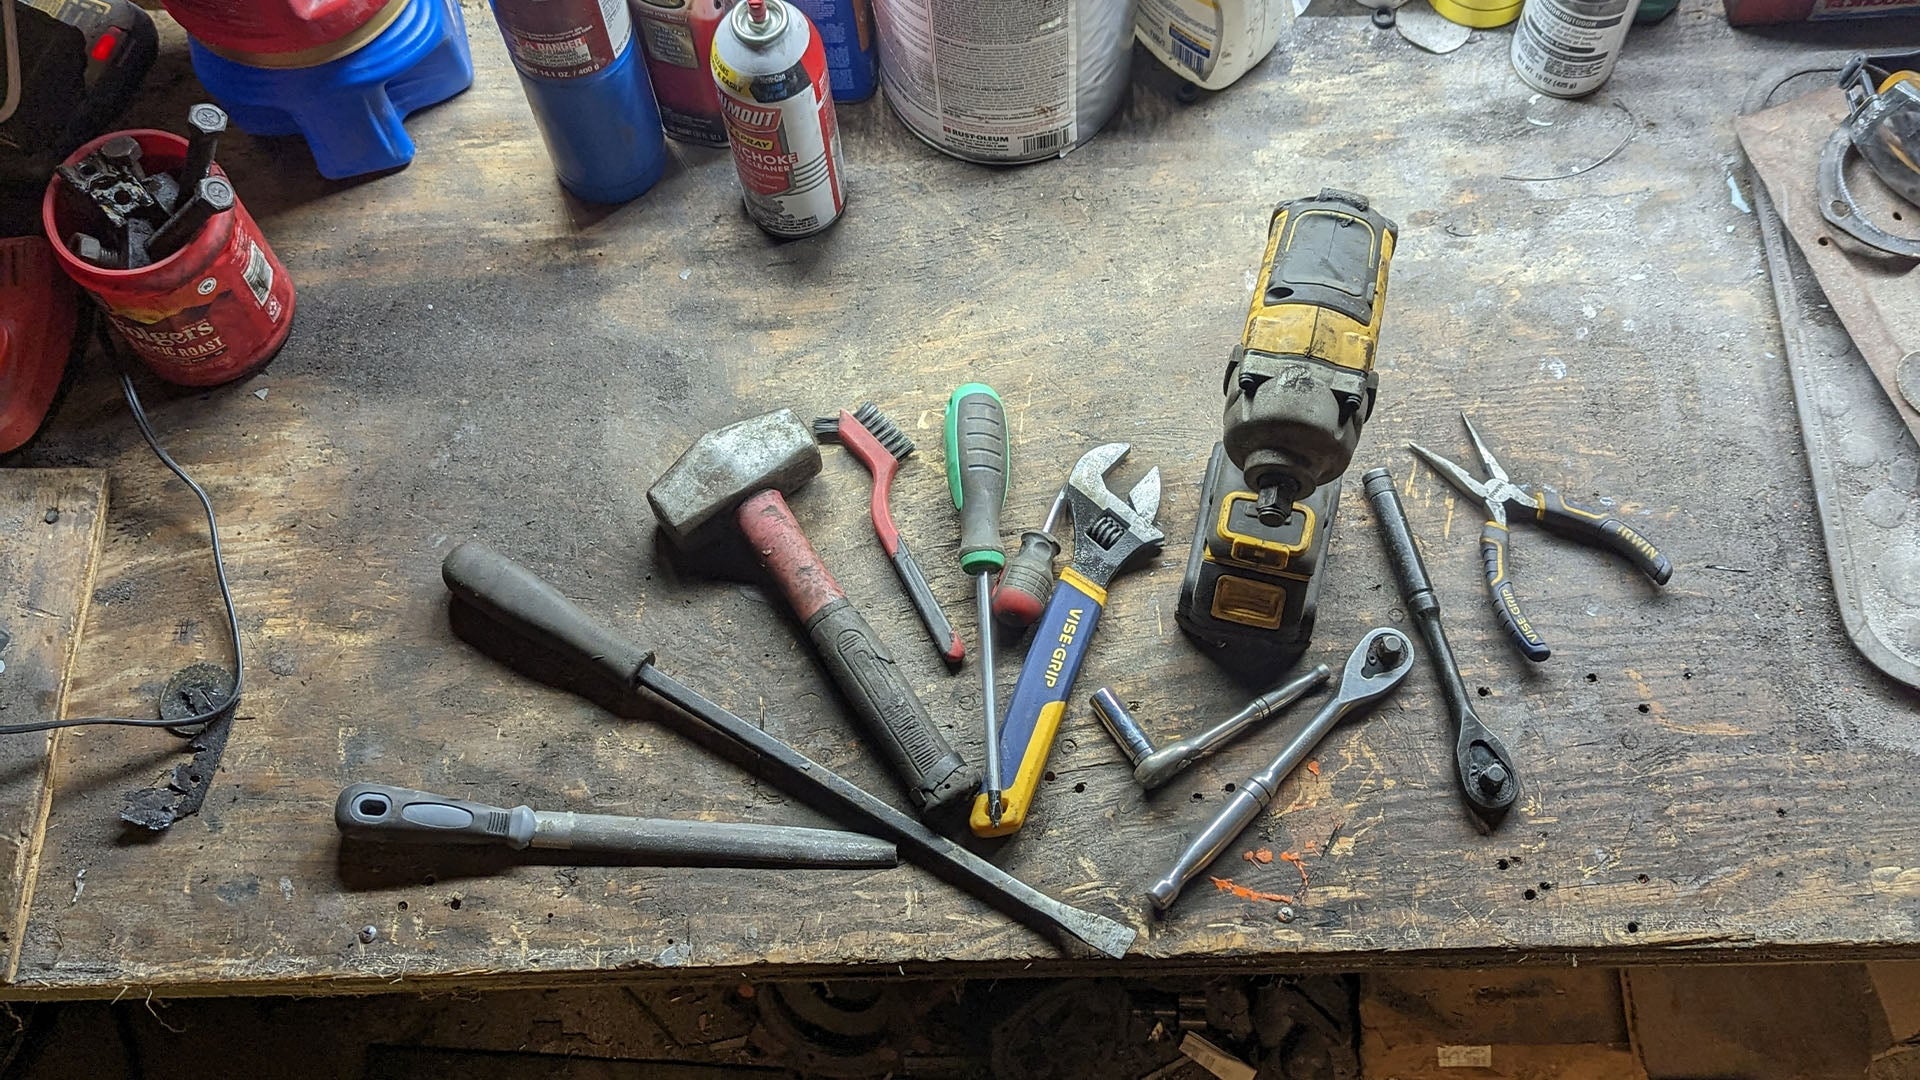 Make no mistake; there's no replacement for good tools, as it's a lot easier to focus on your craftsmanship when cheap junk isn't making life miserabl